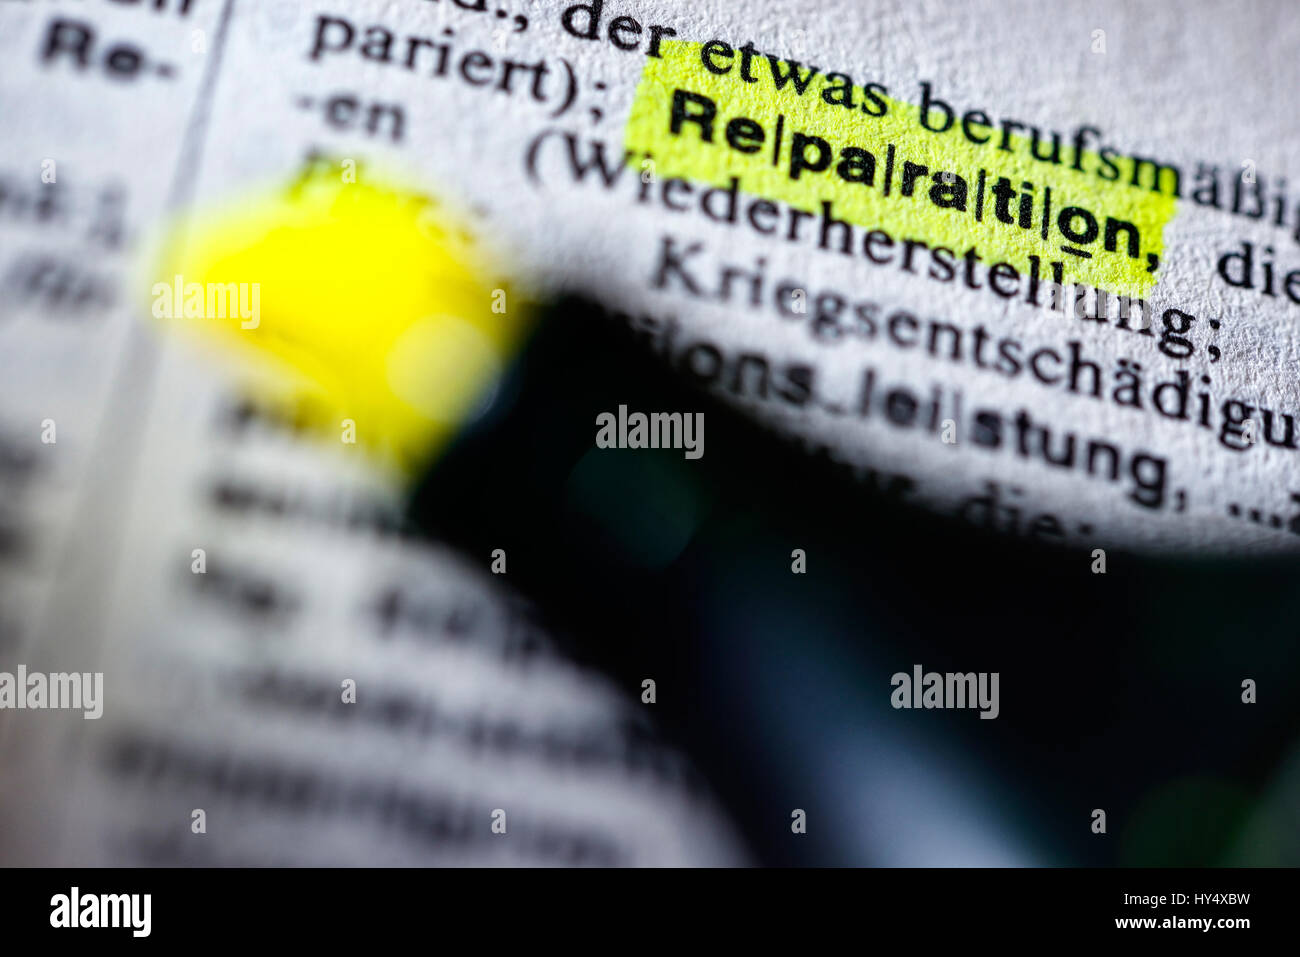 The word Reparation in a dictionary, Das Wort Reparation in einem Woerterbuch Stock Photo